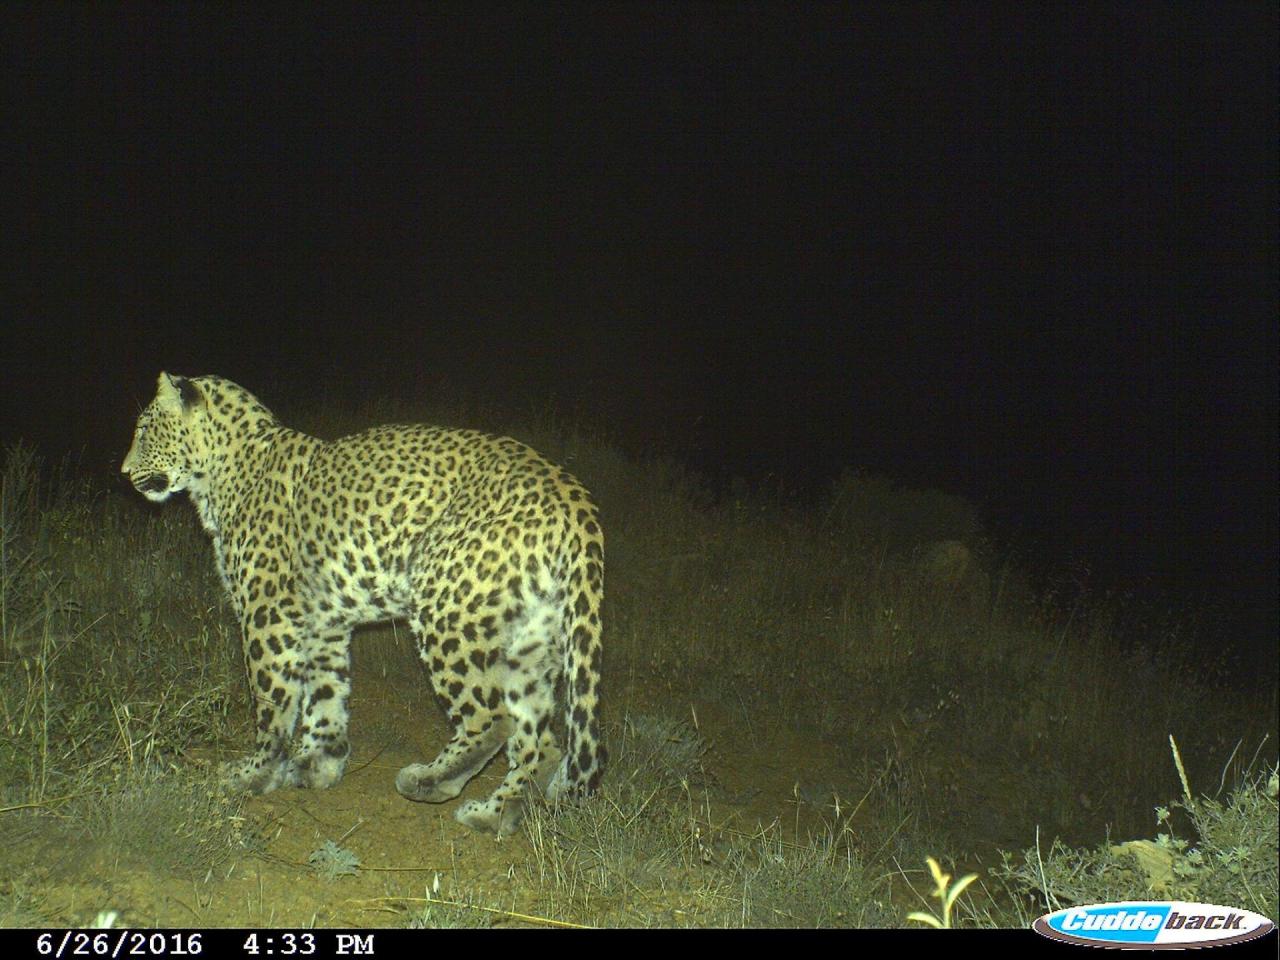 Another Caucasian leopard cubs captured on camera in Azerbaijan